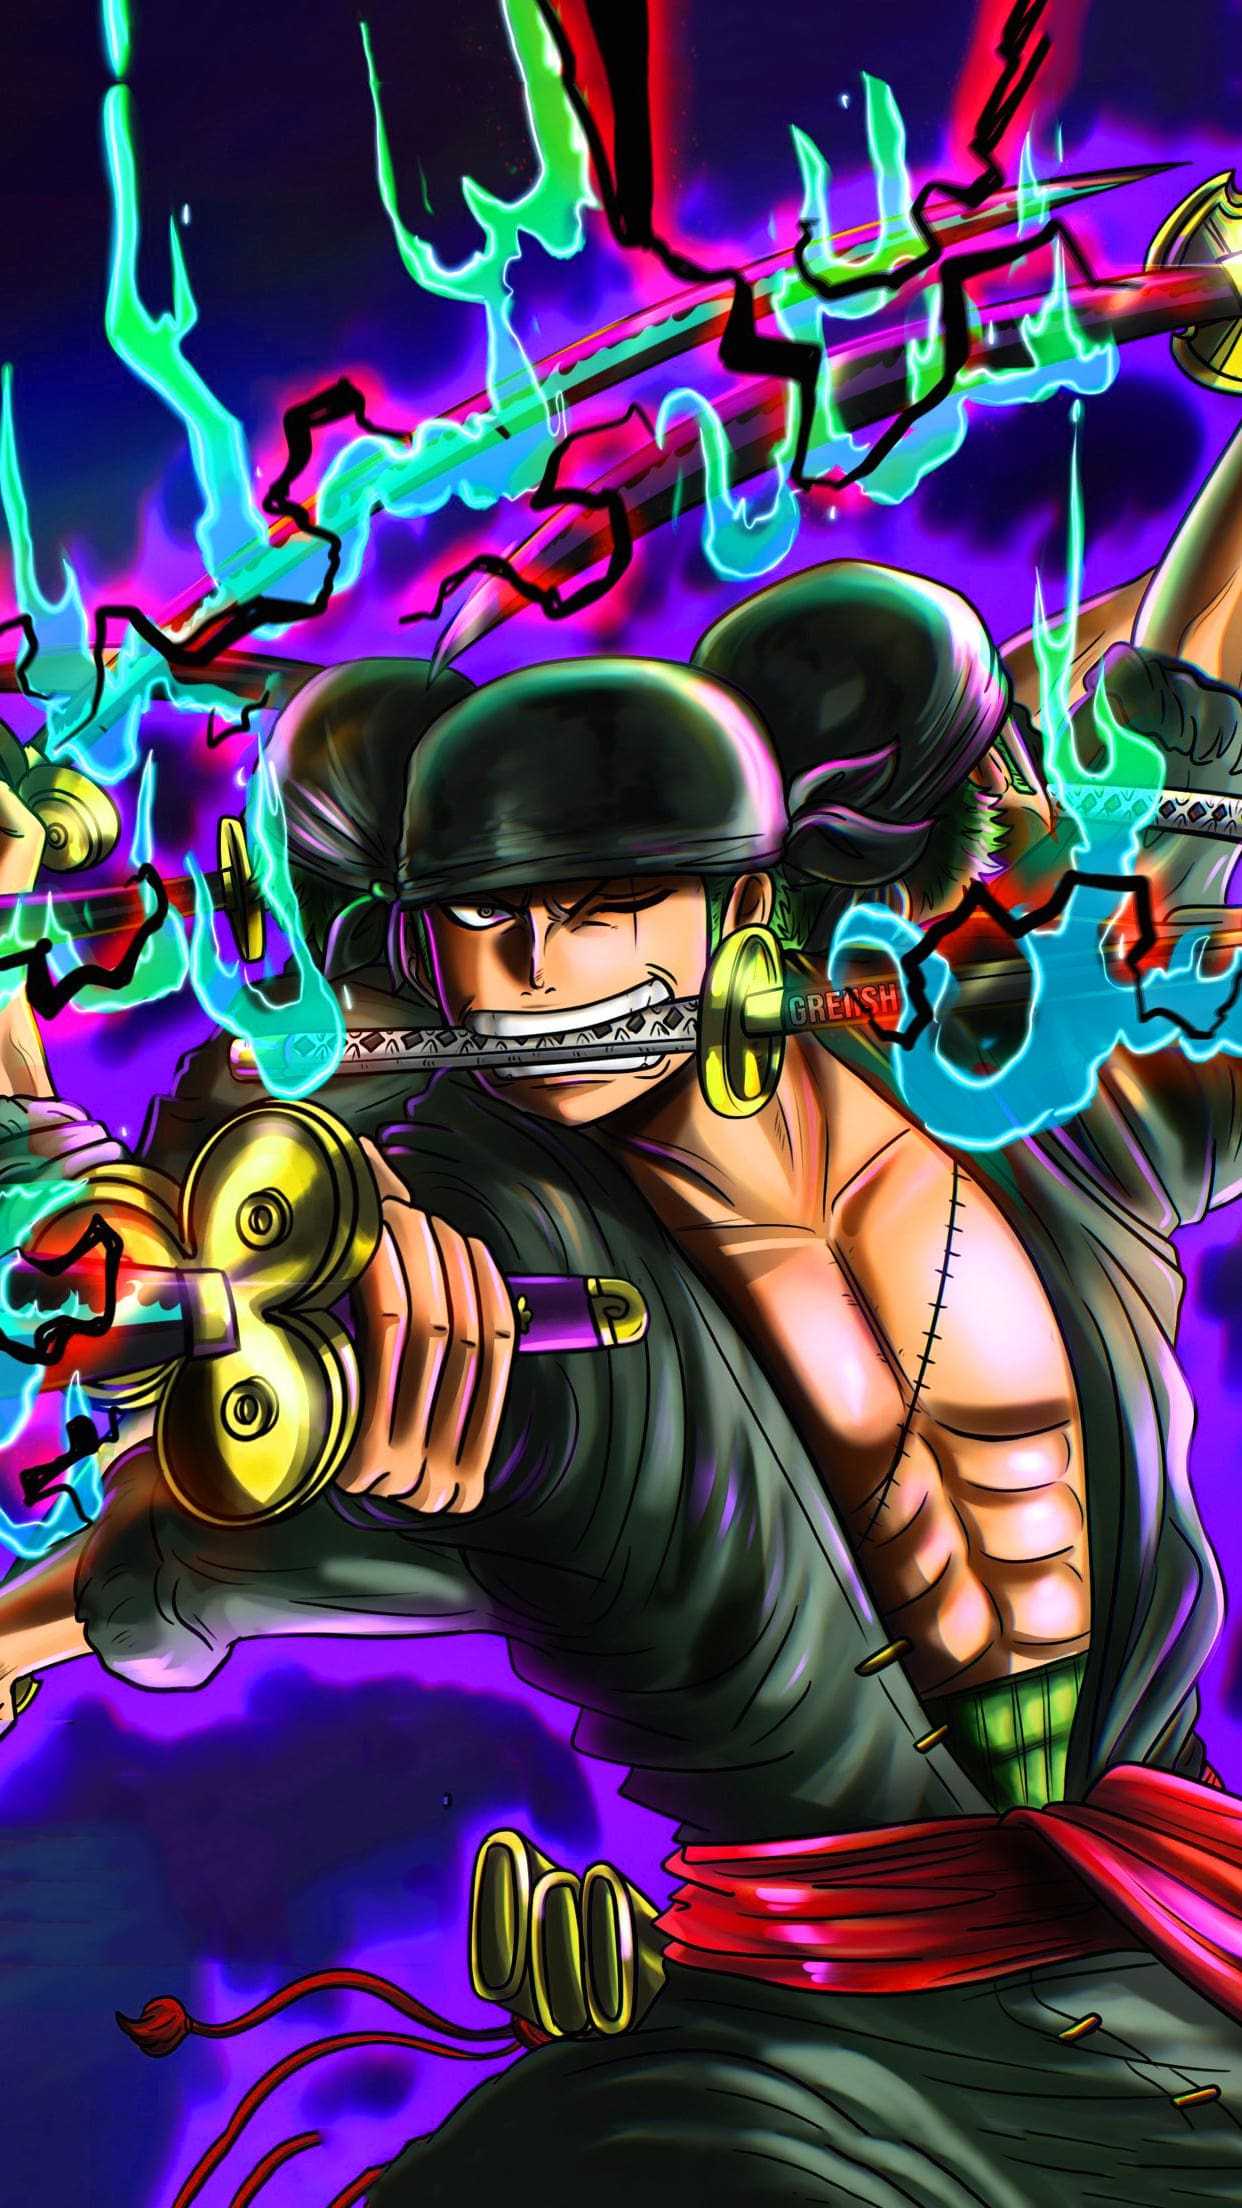 One Piece 4k The King Of Hell Wallpaper, HD Anime 4K Wallpapers